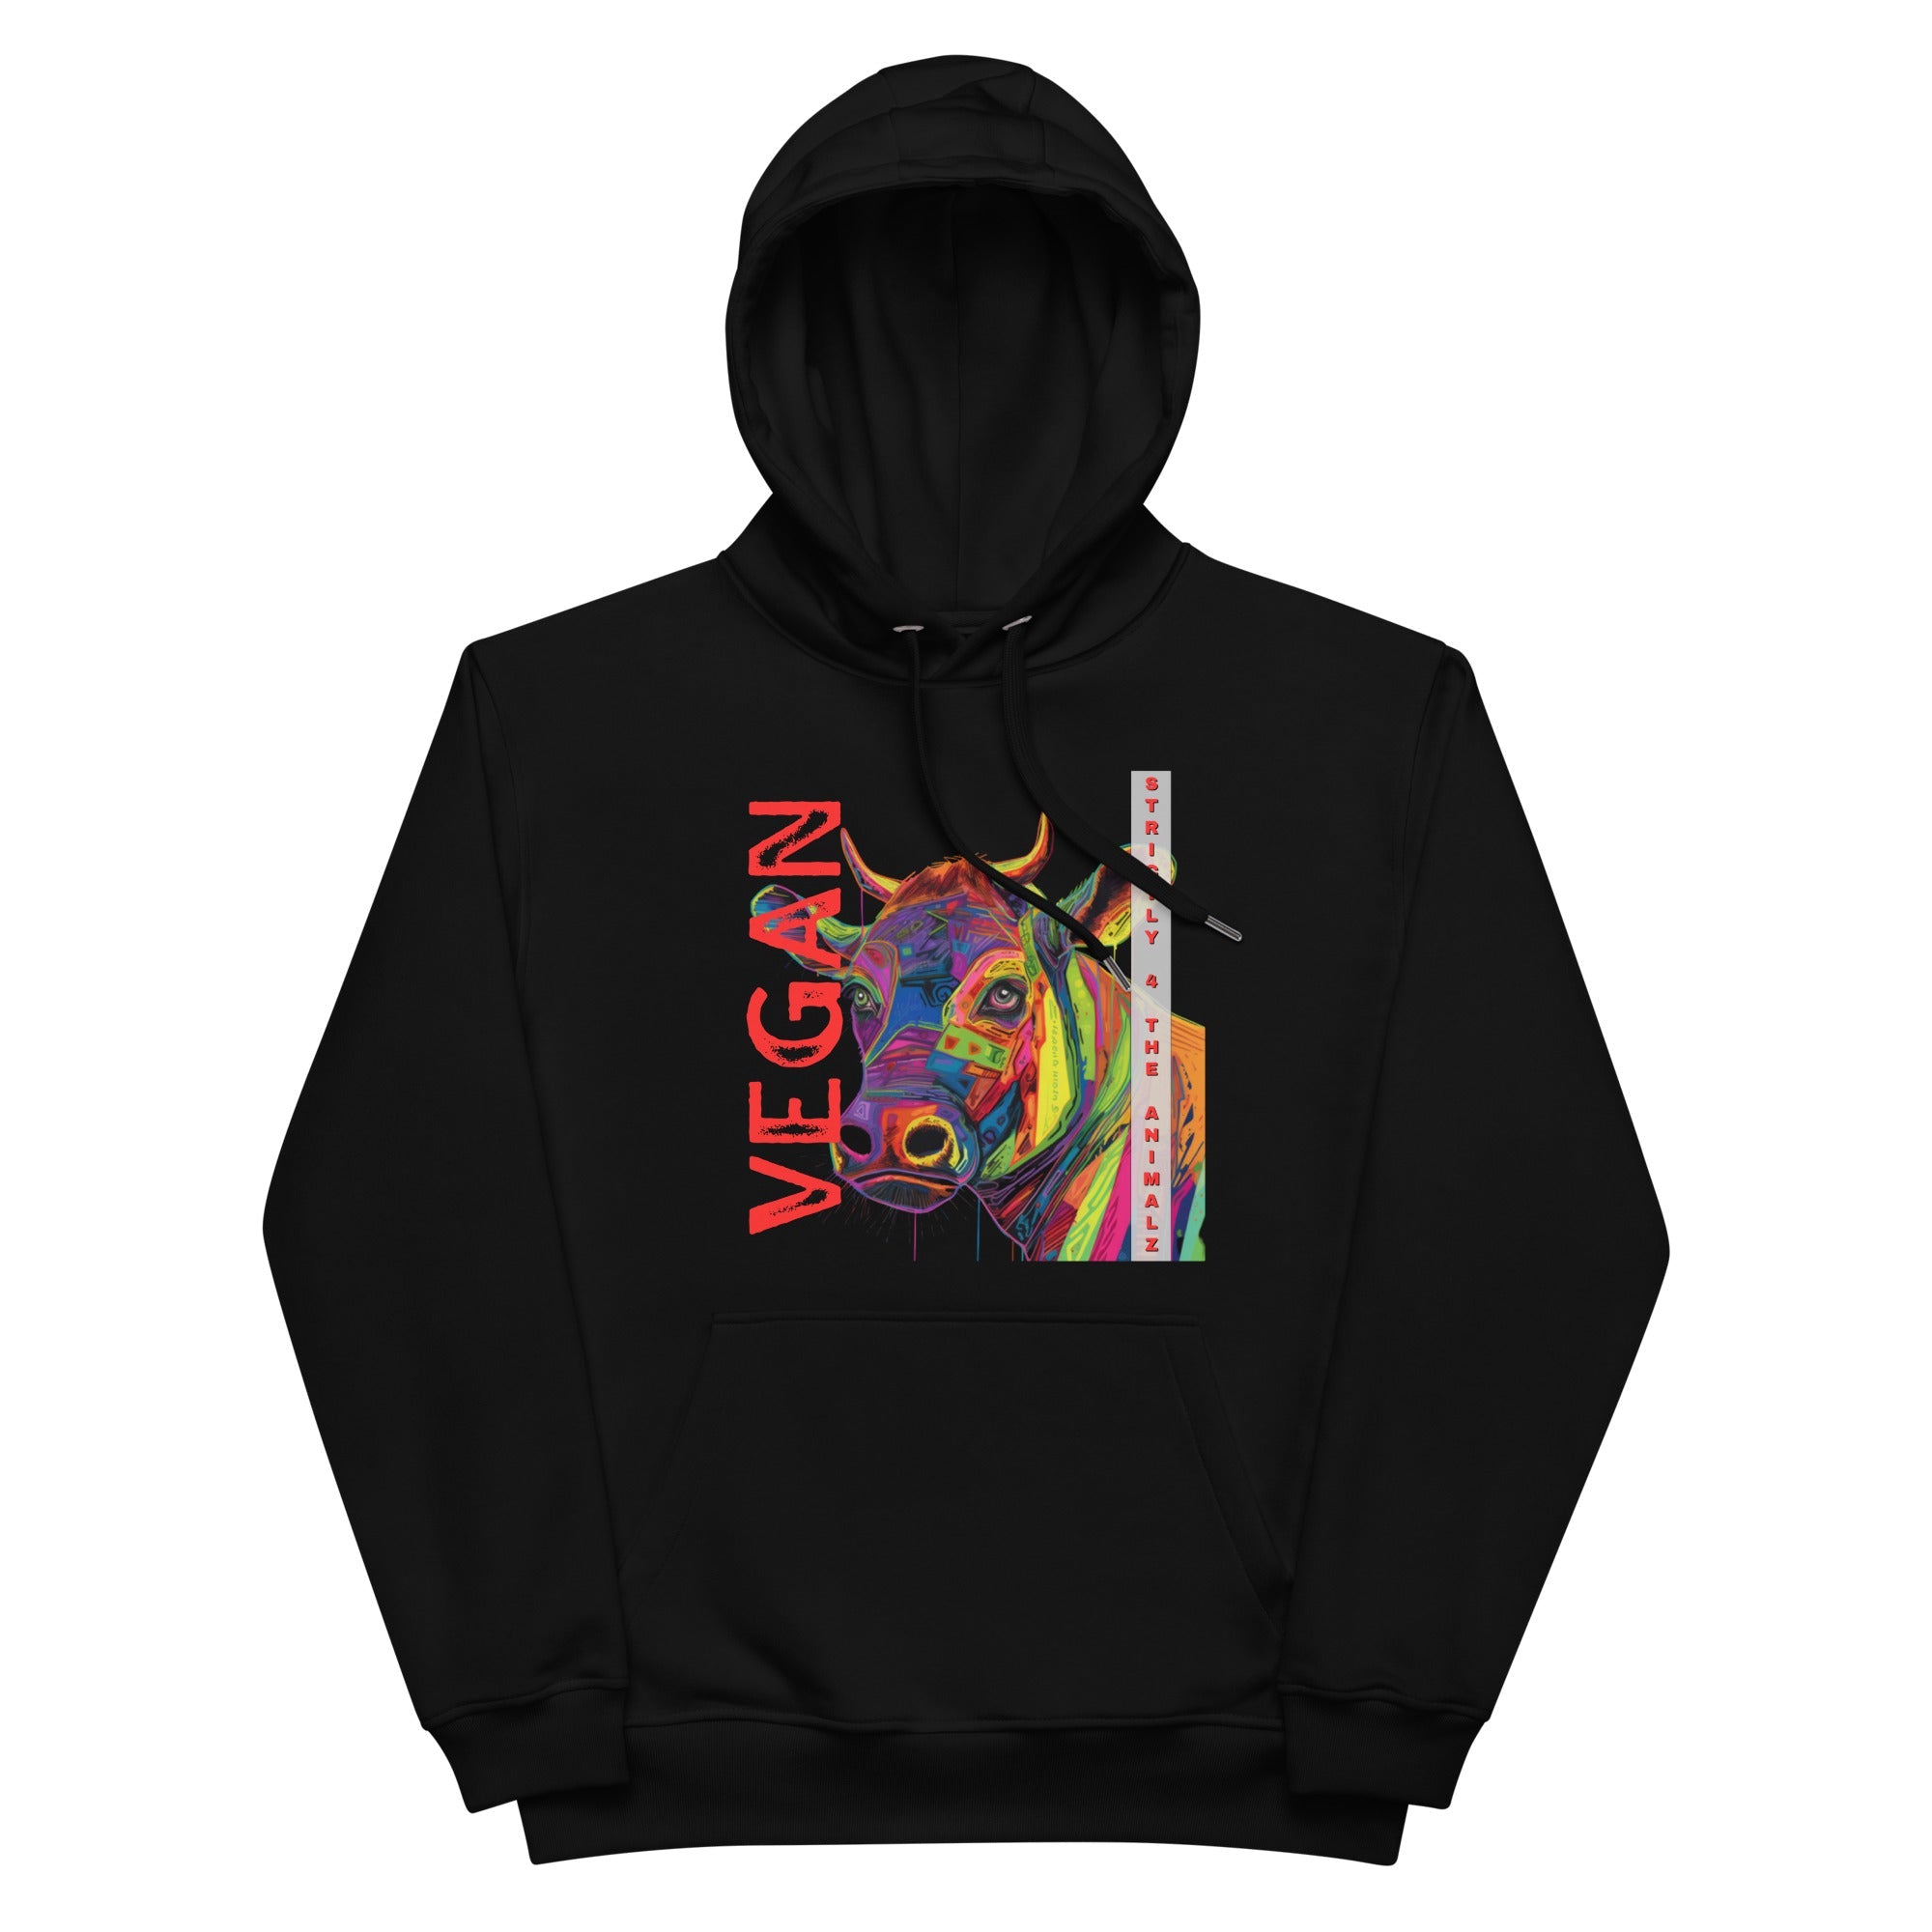 Strictly 4 the A.N.I.M.A.L.Z. Hoodie